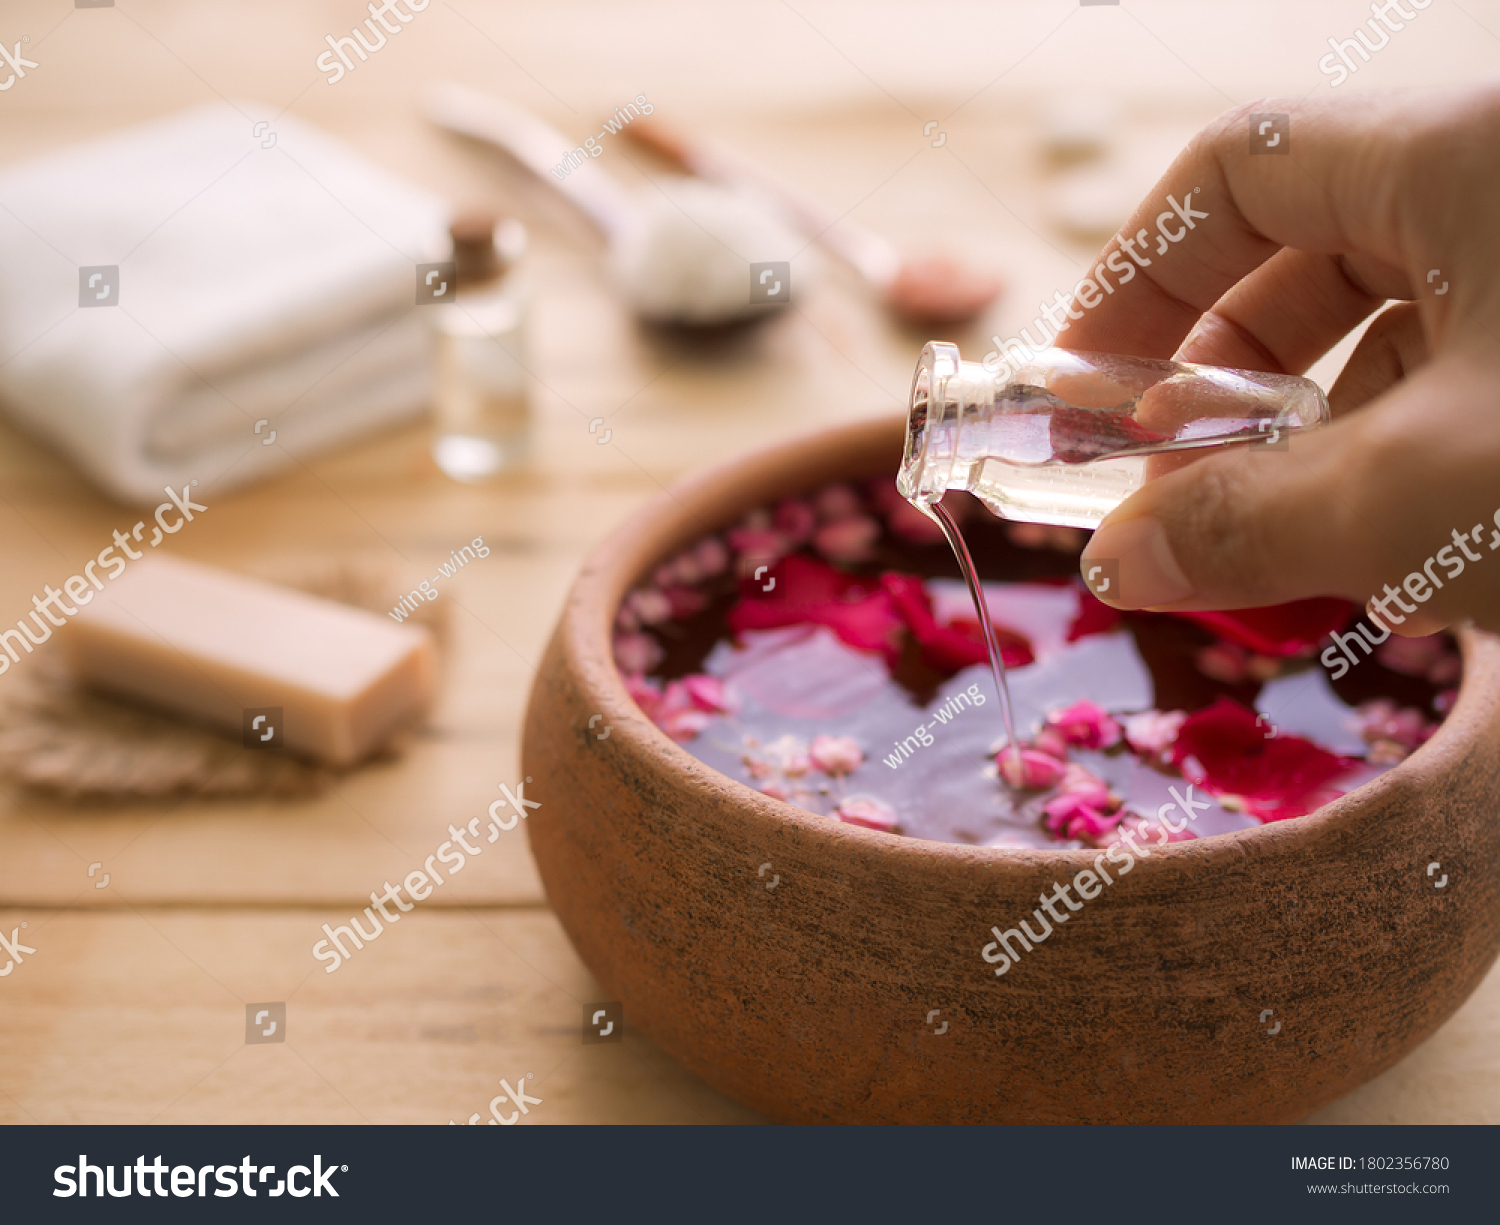 Hand woman pour coconut oil in to aroma essential smell rose with image of soap, towel, massage oil, salt spa, candle. Aroma therapy spa set for luxury hotel or professional massage aromatic oriental. #1802356780